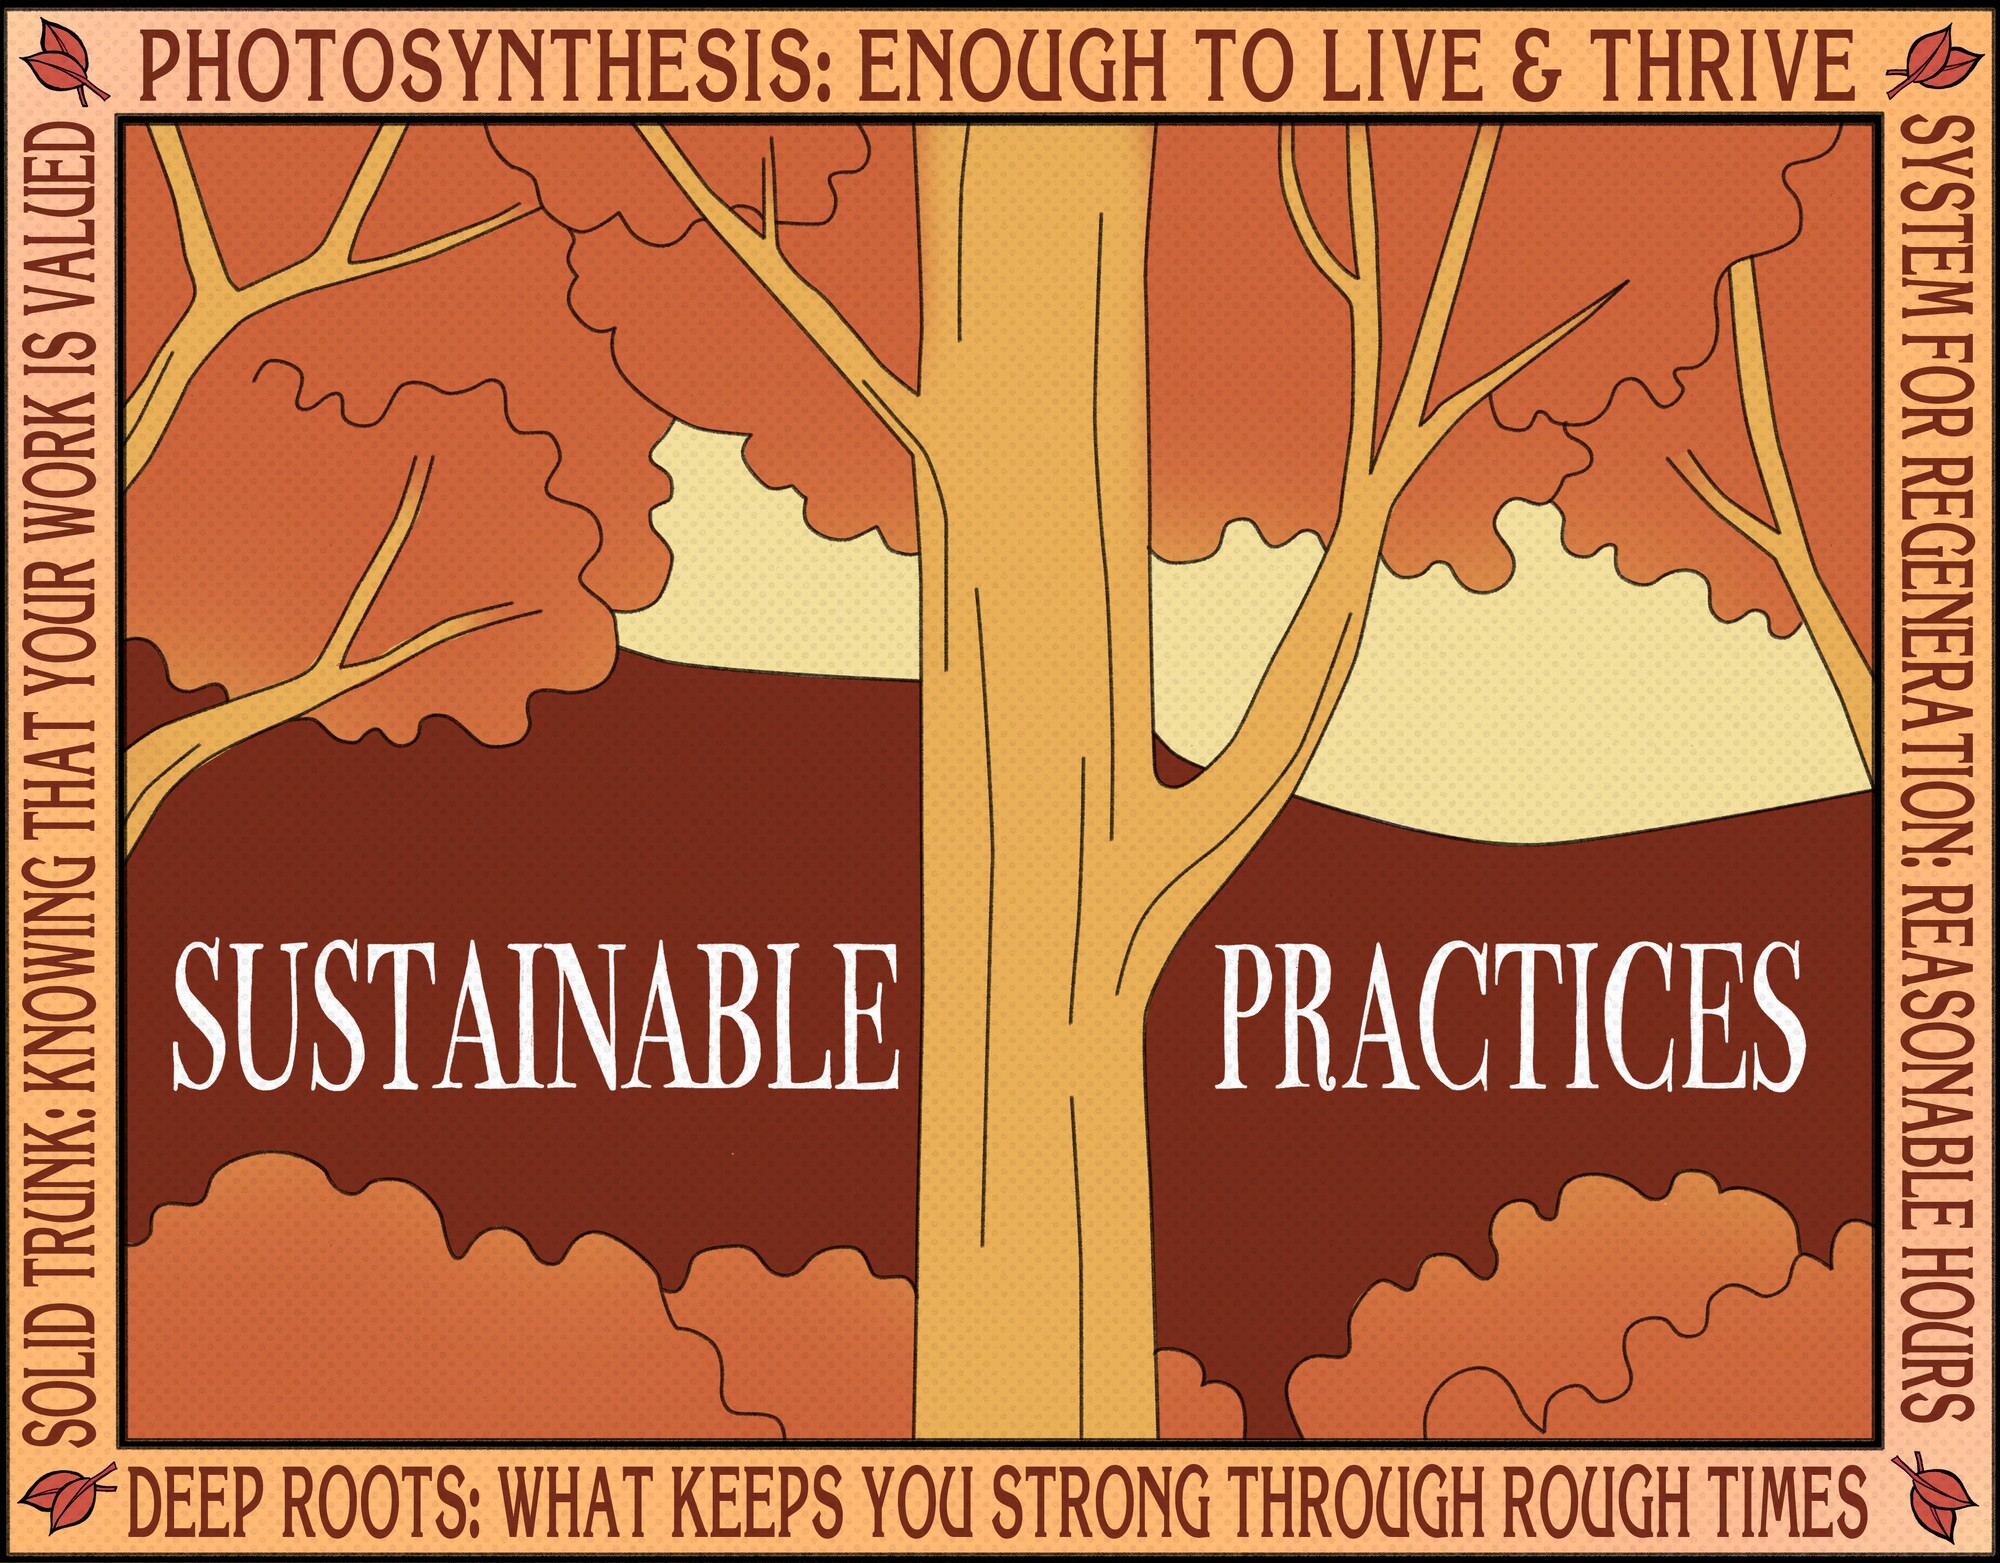 An orange image with trees in the background and the words "Sustainable Practices" in the center. The words "Photosynthesis," "System for Regeneration," "Deep Roots," and "Solid Trunk" are in the margins.